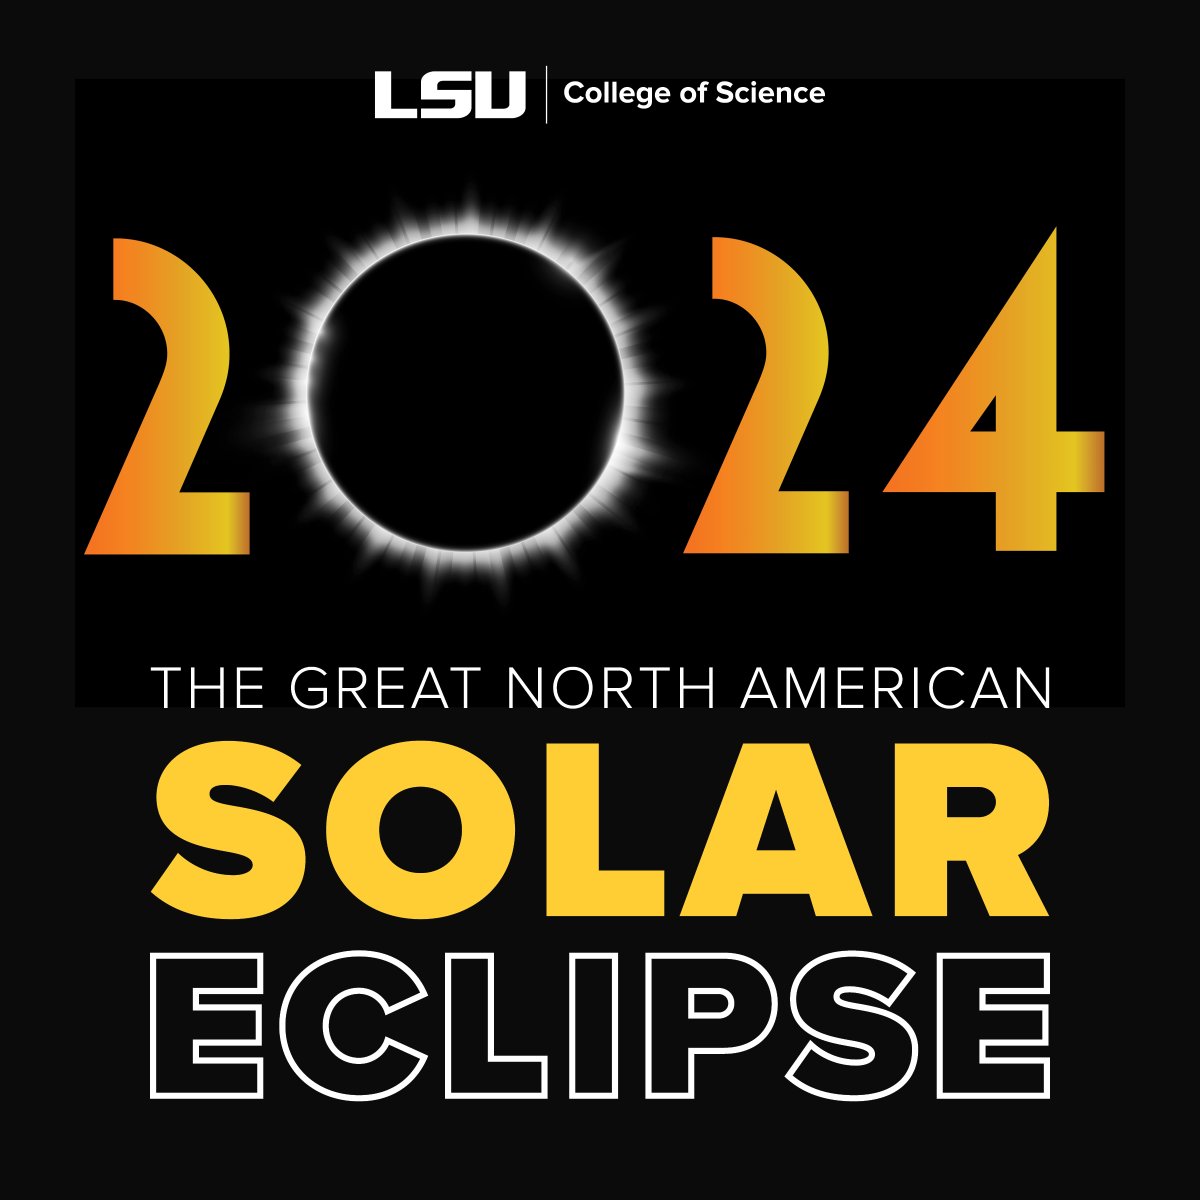 Date: Monday, April 8 Time: 12:30 – 2:30 p.m. Location: LSU Parade Grounds What to Bring: Yourself, your friends, and eclipse glasses if you have them (we'll have a limited supply on hand, but it's first-come, first-served!) We'll have some snacks and water to keep us fueled!